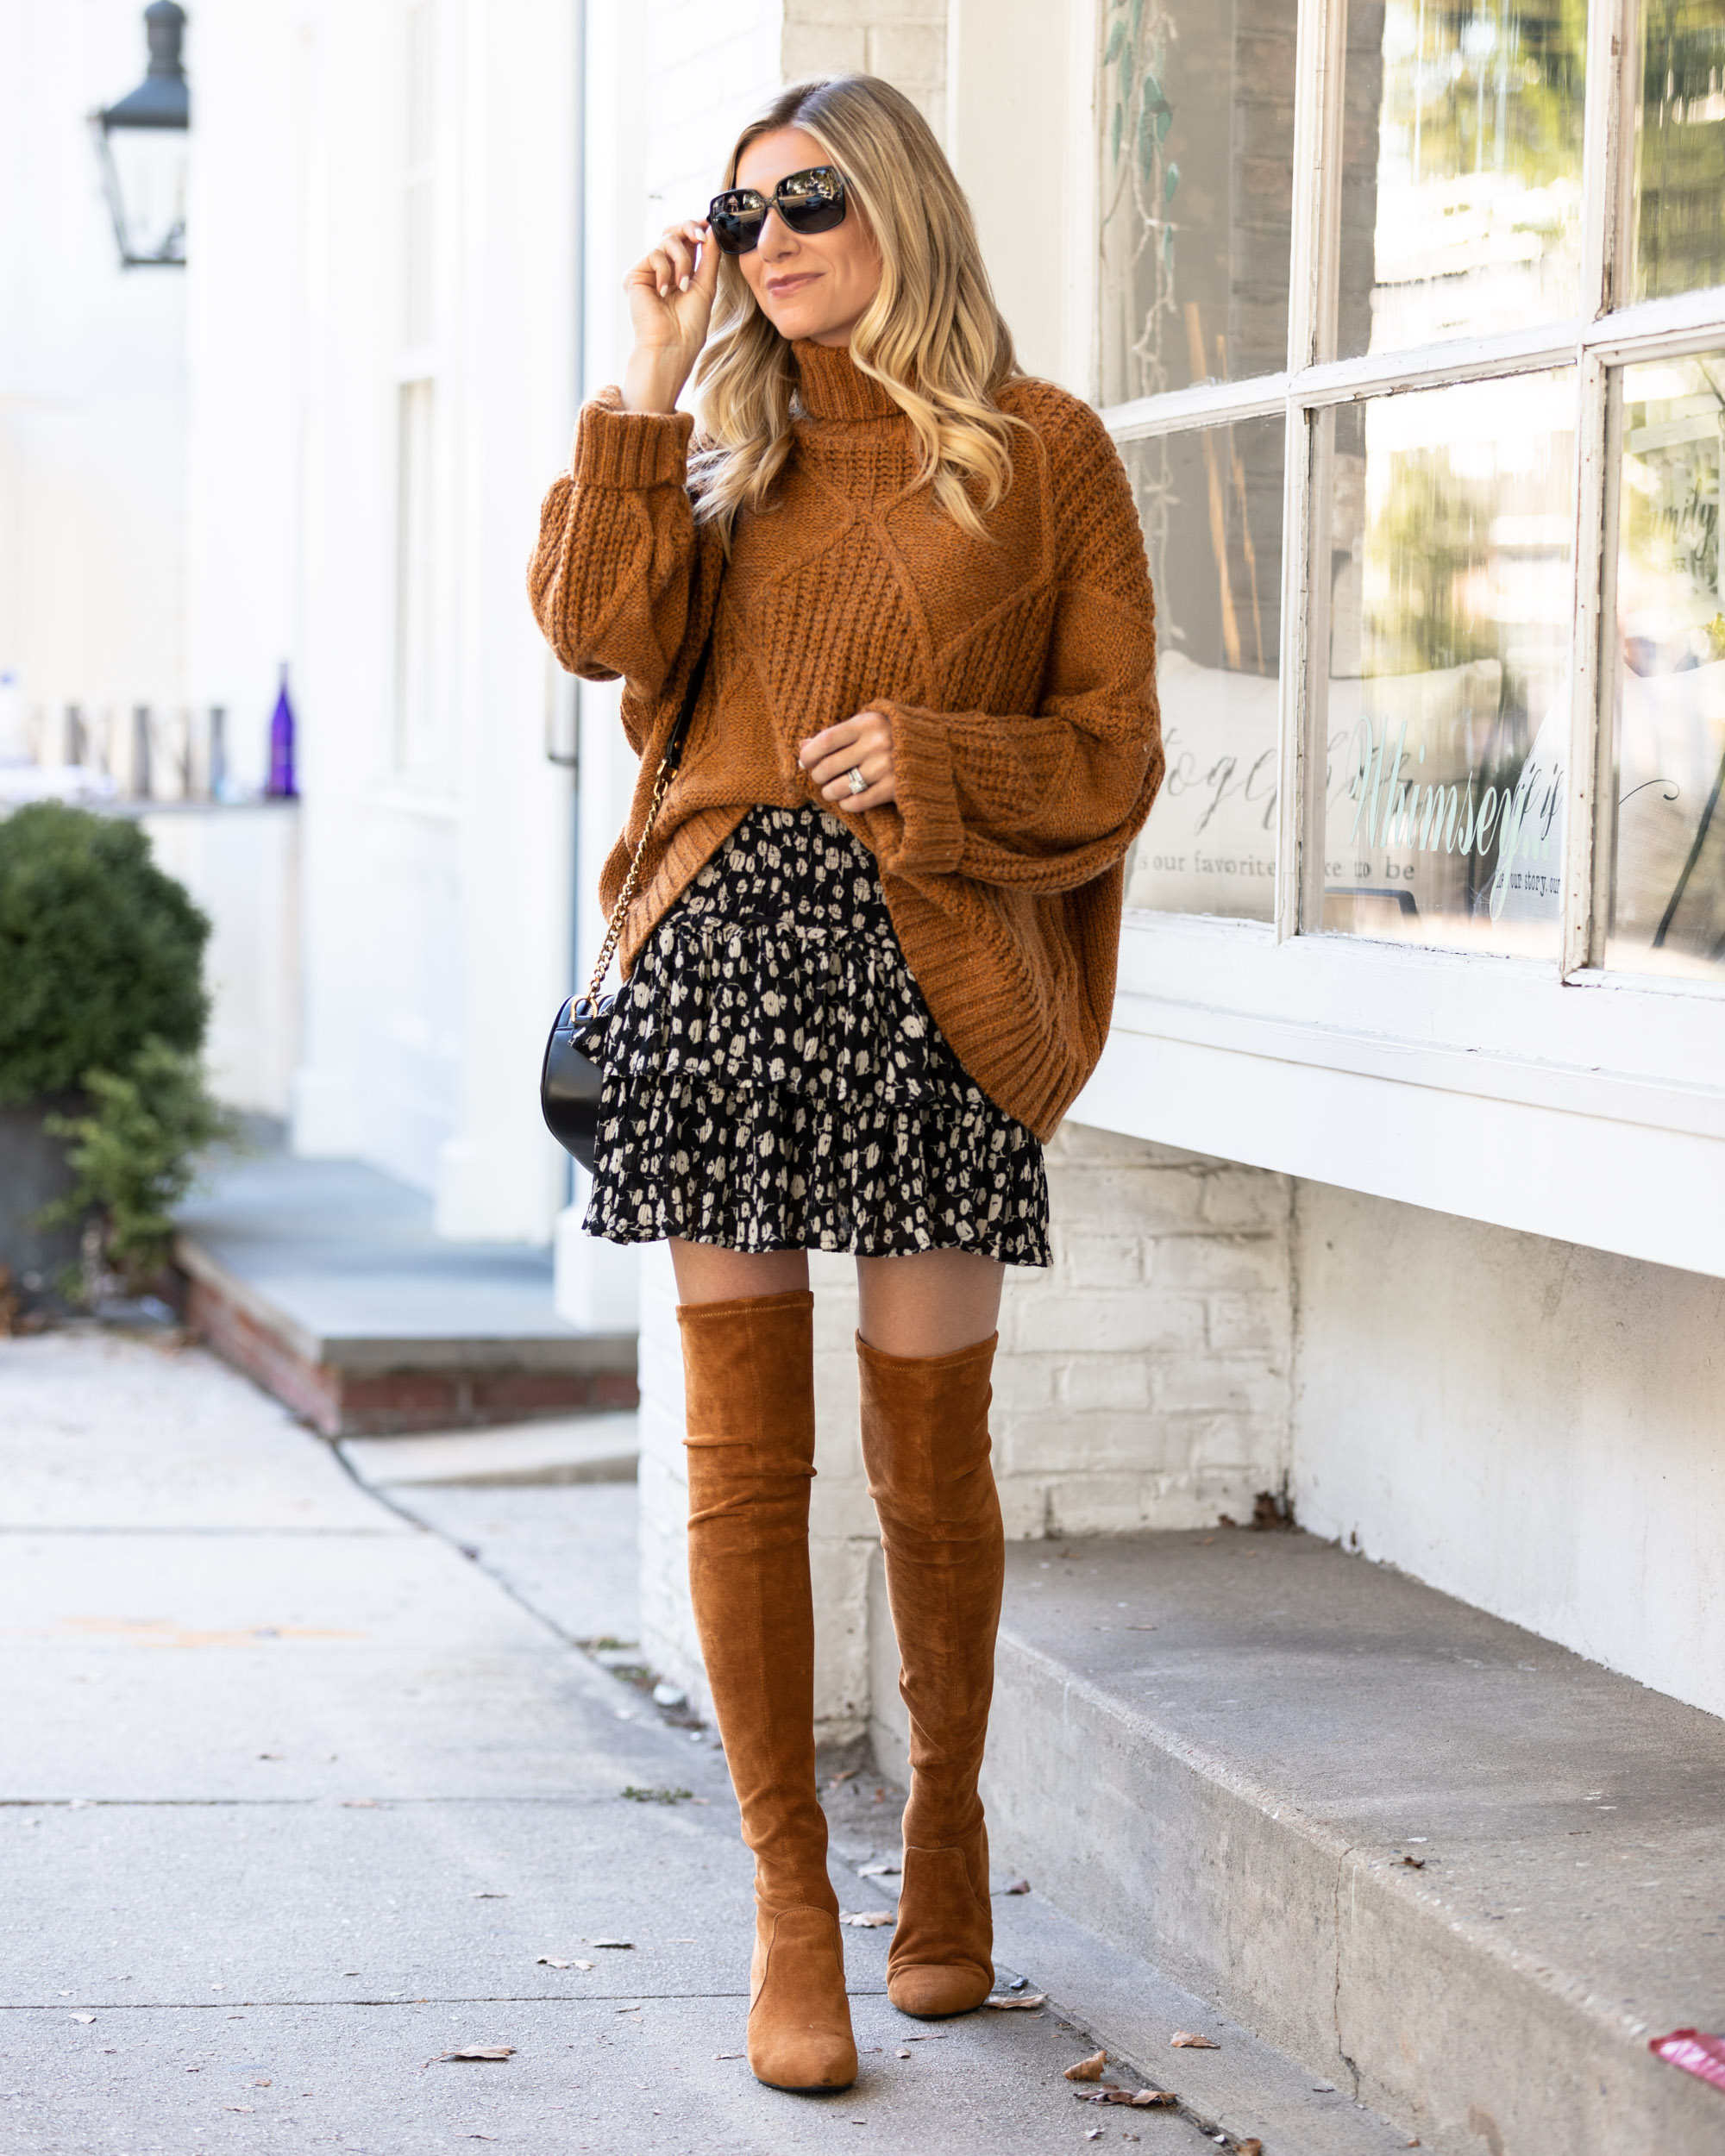 ruthie-grace-skirt-styled-for-fall-the-glamorous-gal